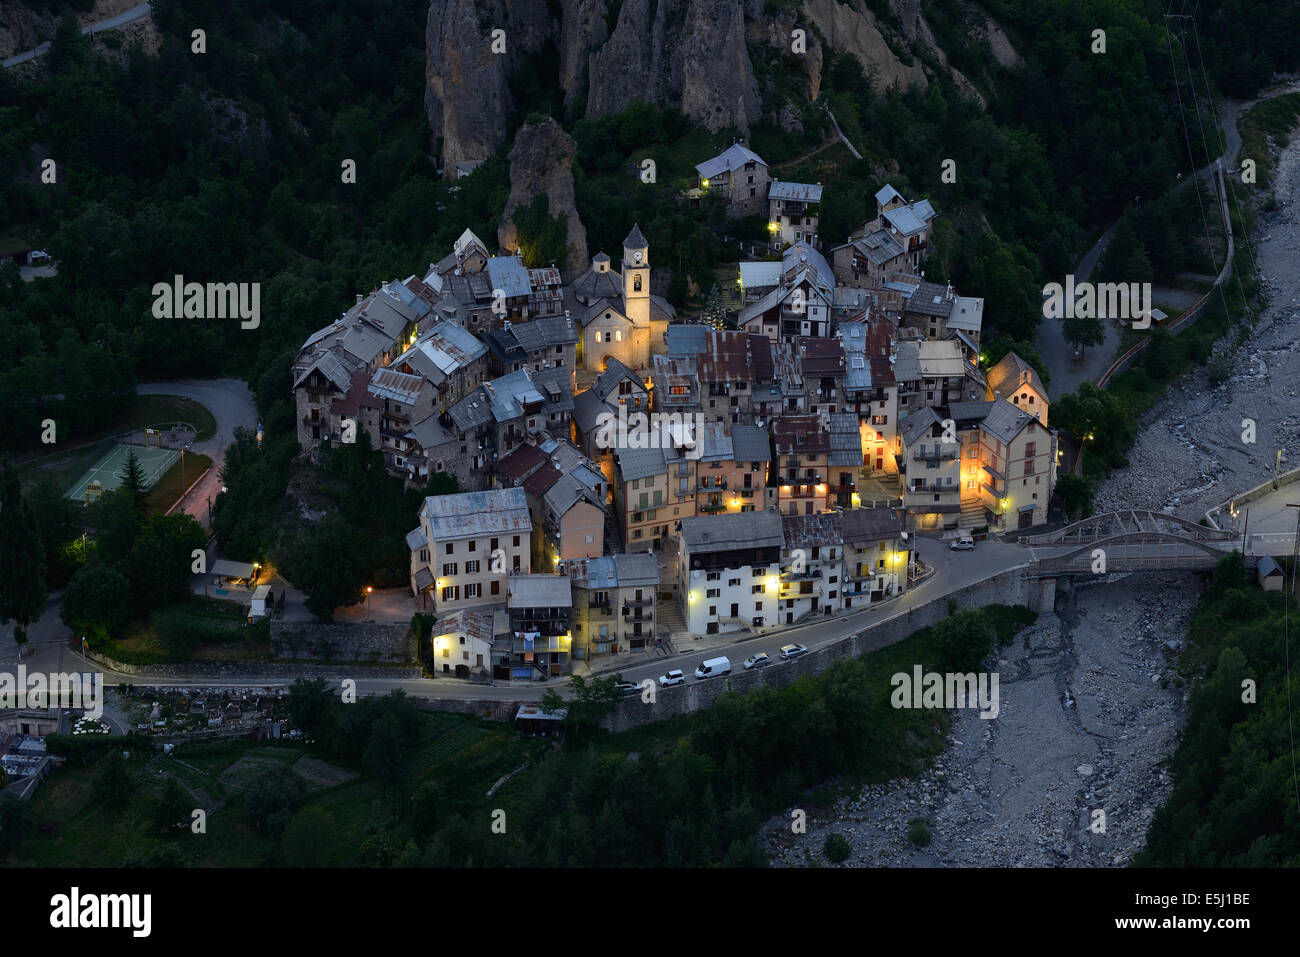 Medieval village at twilight. Péone, Alpes-Maritimes, French Riviera's hinterland, France. Stock Photo